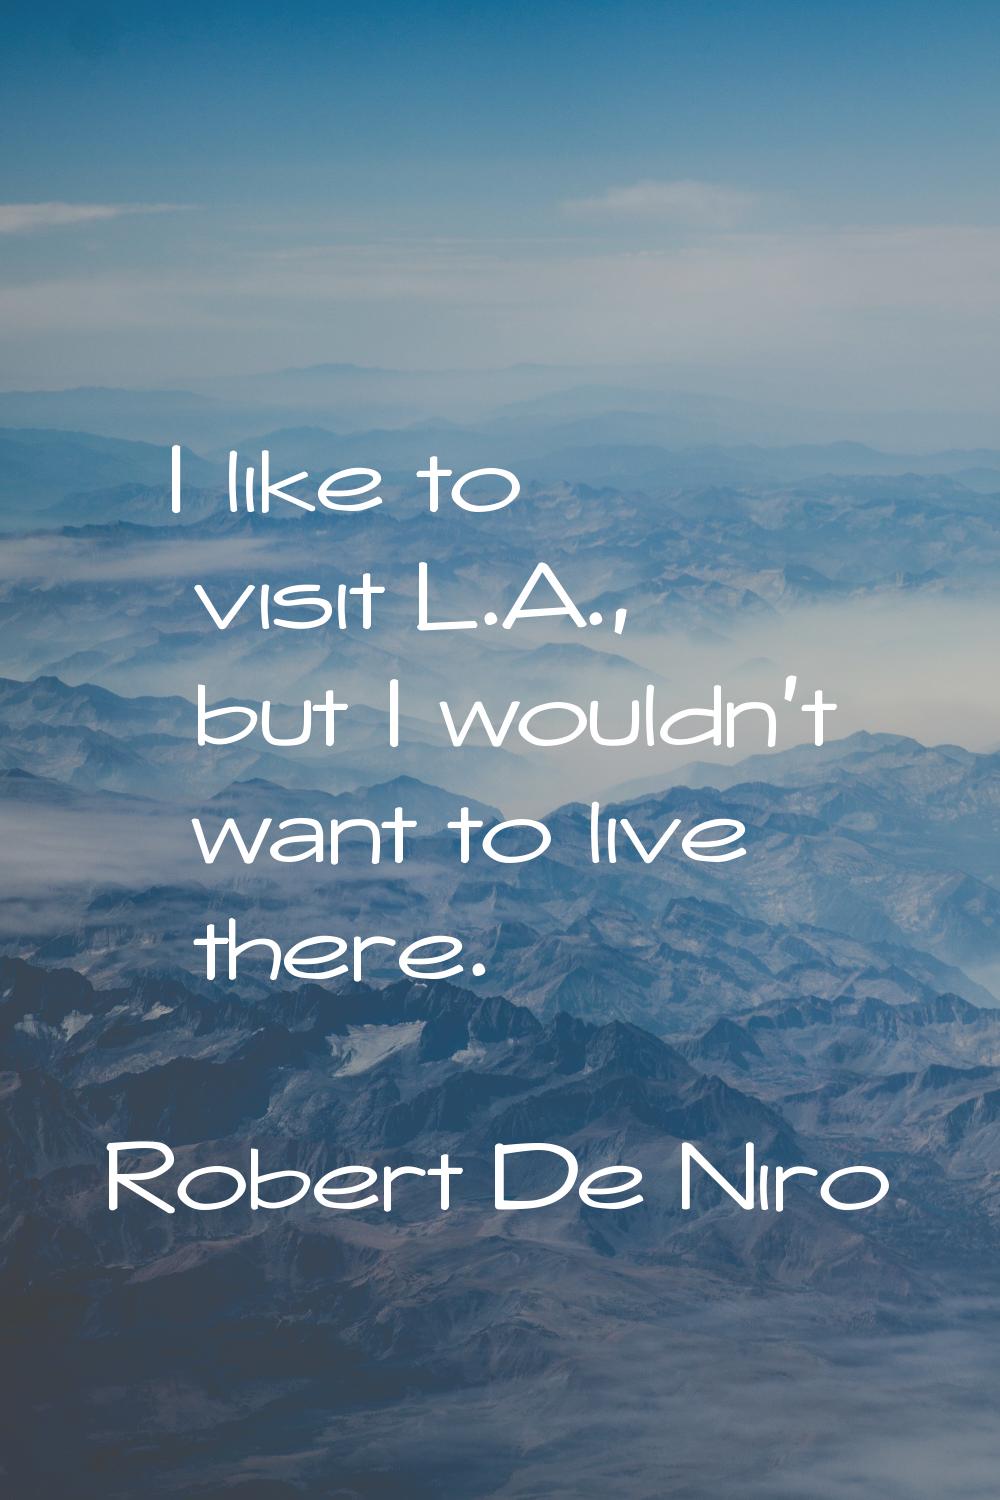 I like to visit L.A., but I wouldn't want to live there.